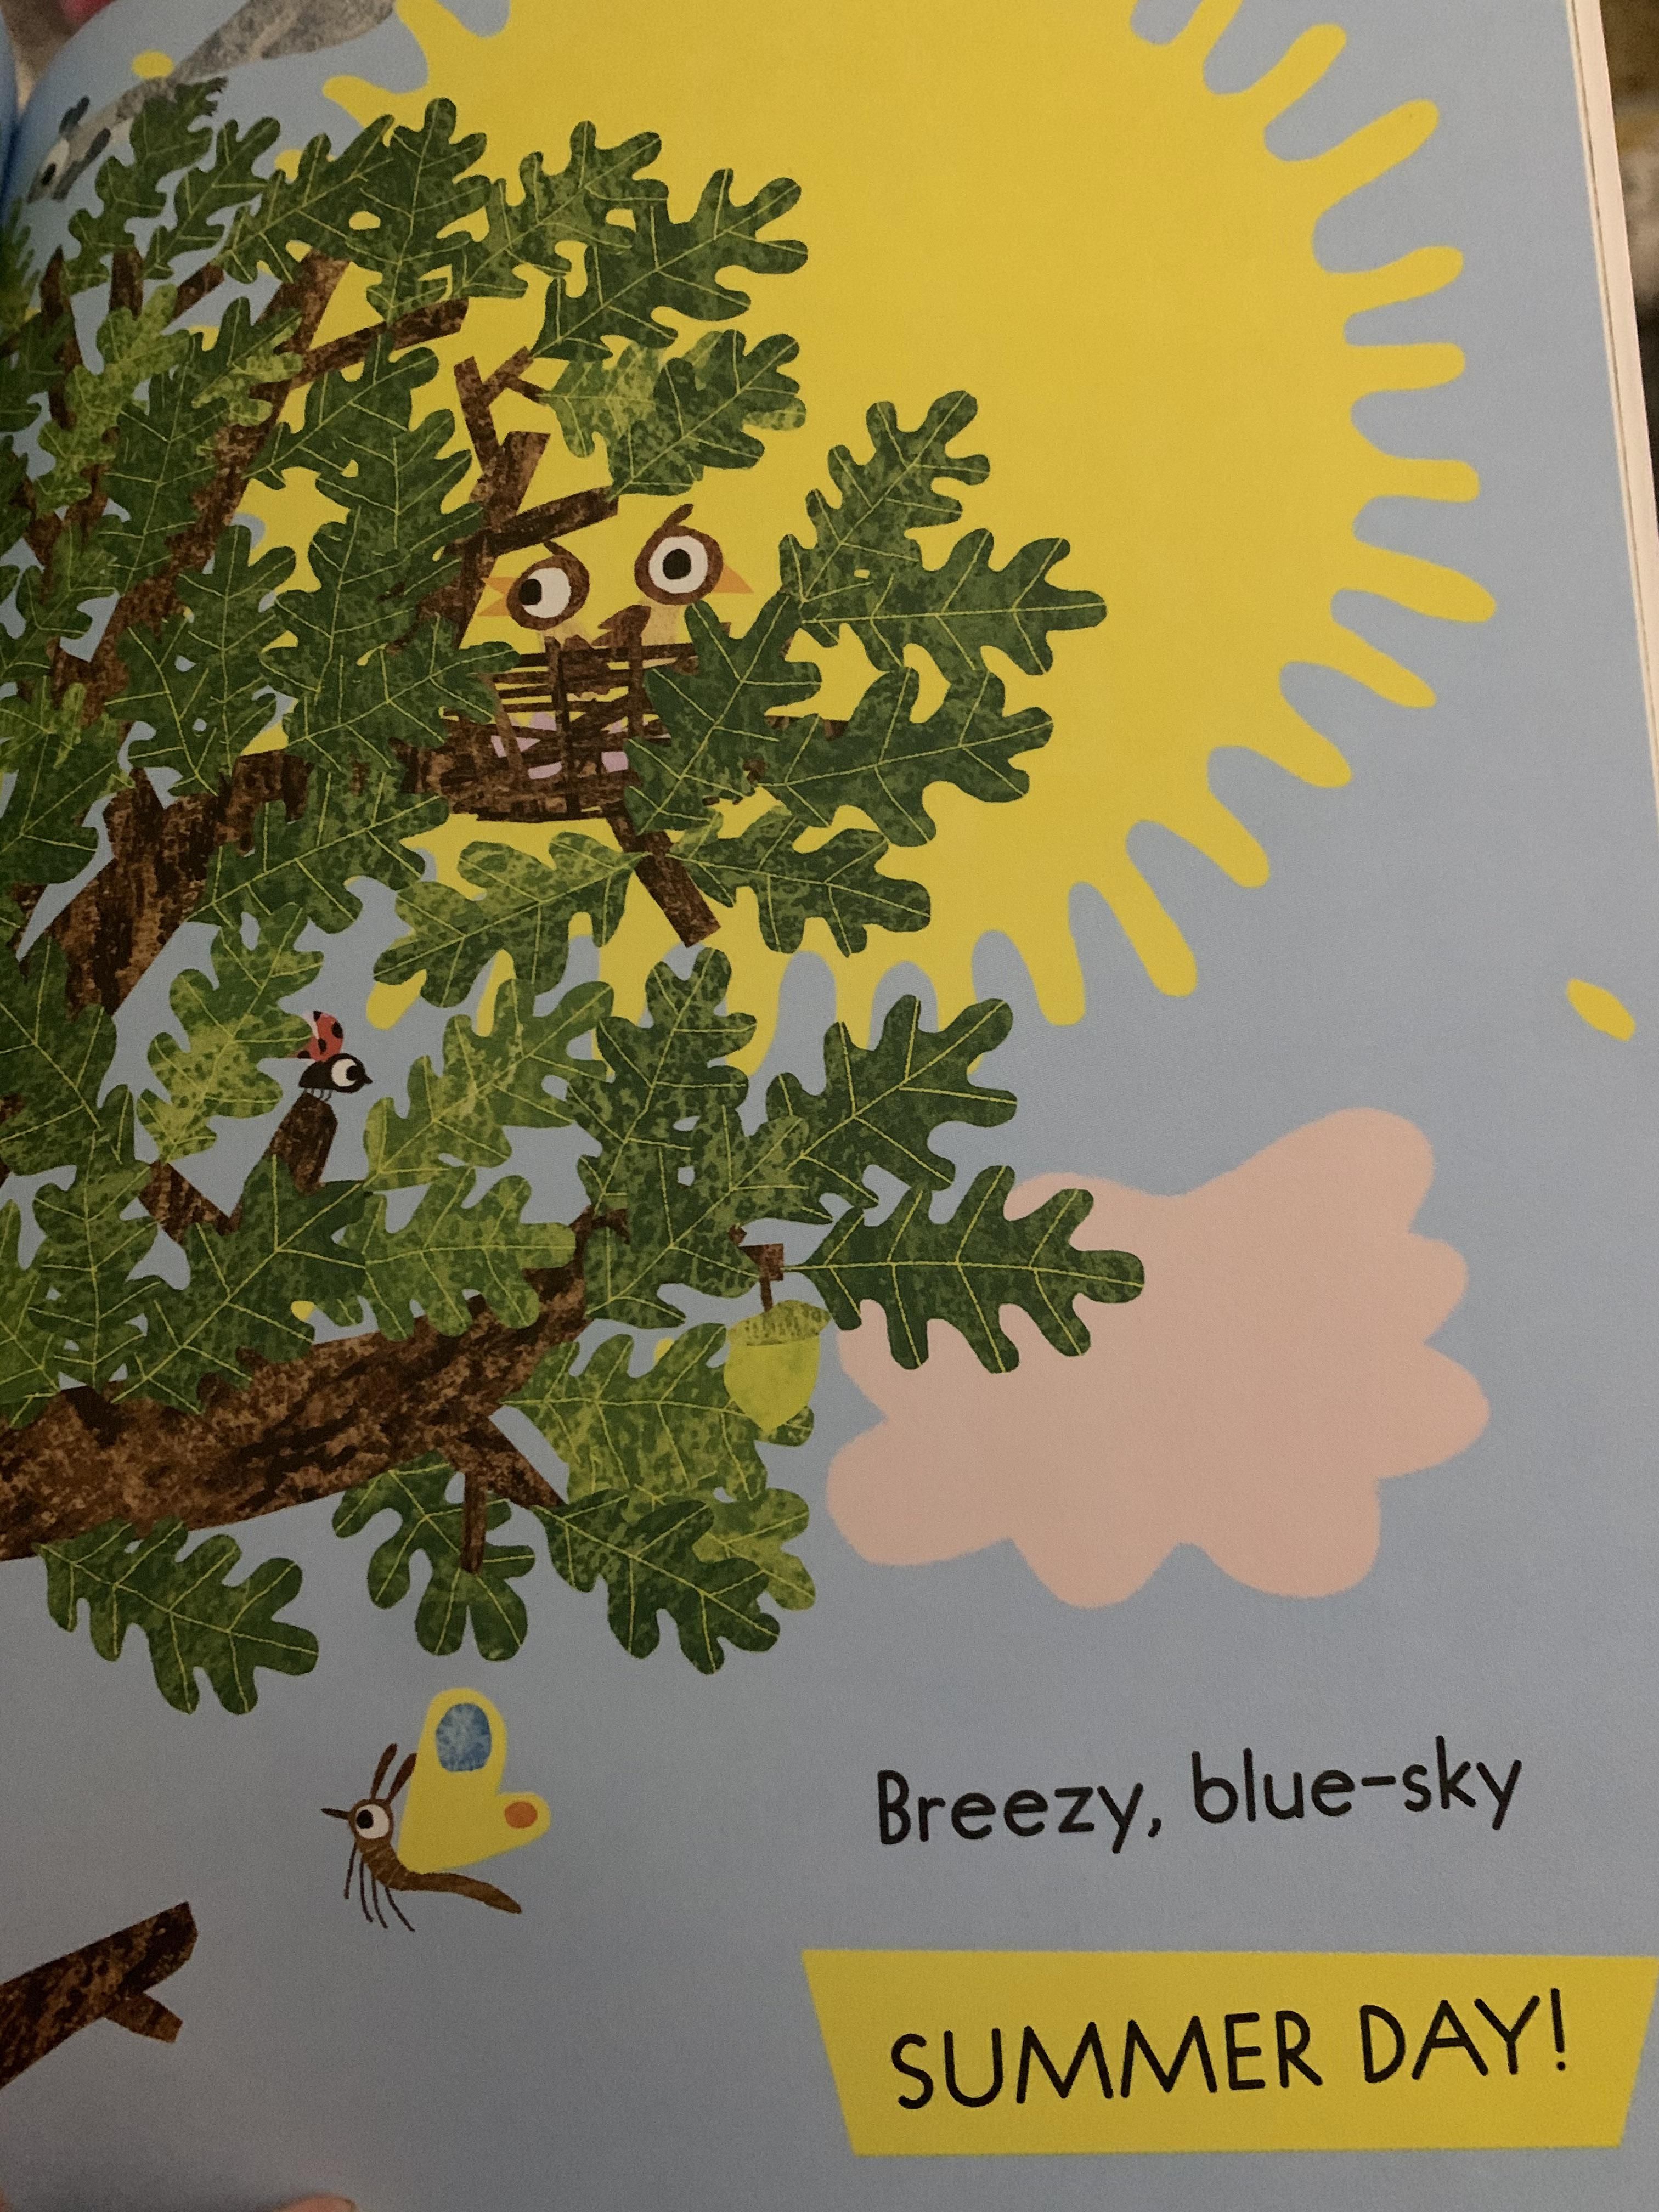 At first I thought this sun was angry AF in my daughters story book...but then I realized it’s just 2 birds!